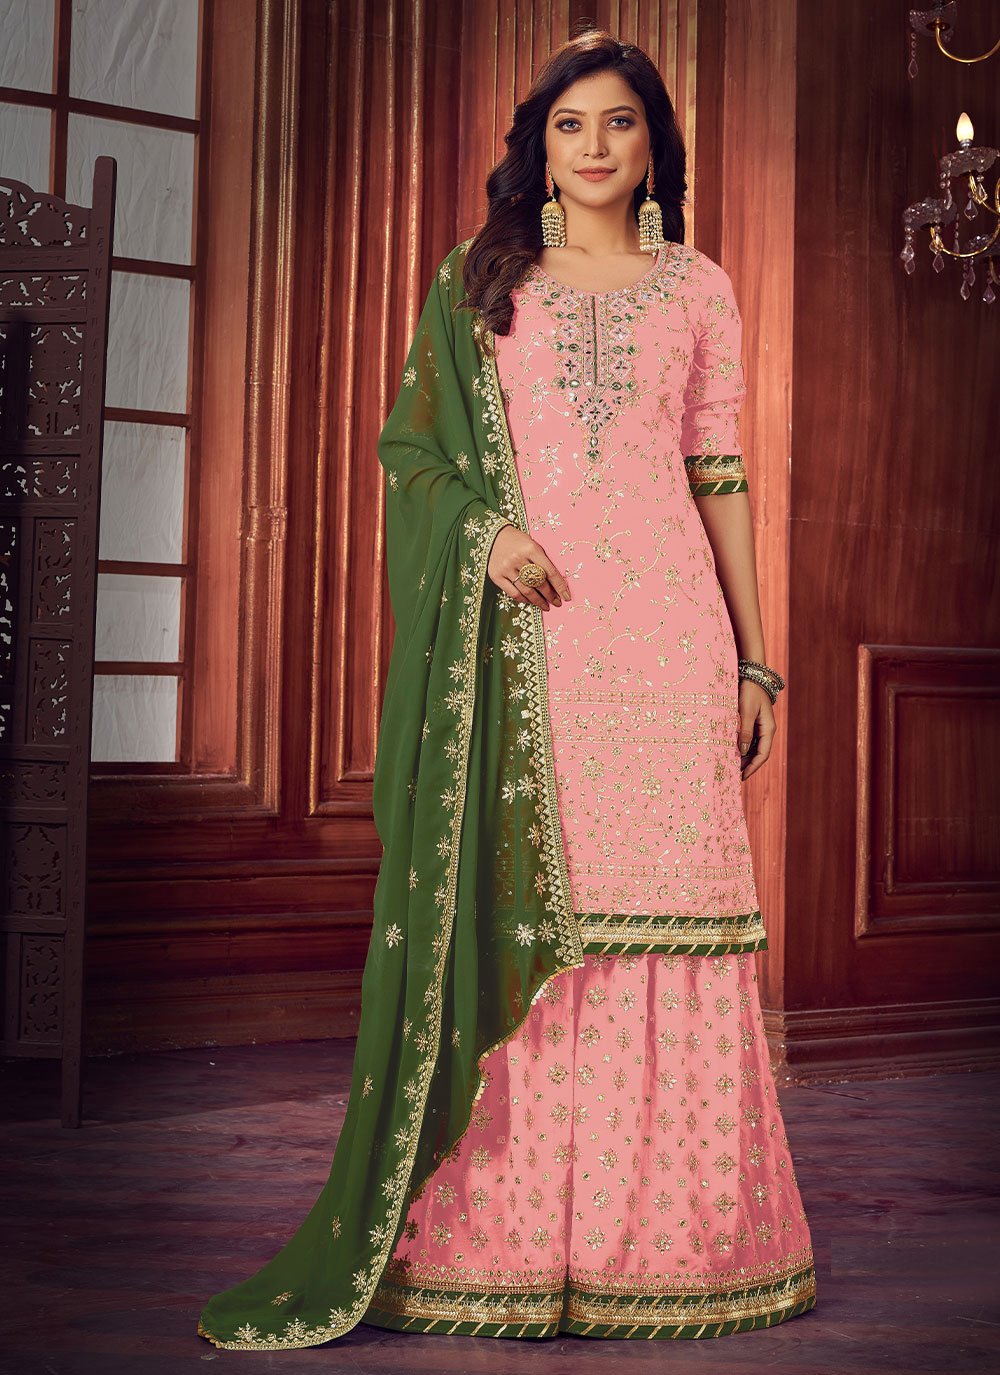 White and Pink Color Combination Straight Long Suit With Dupatta :: ANOKHI  FASHION